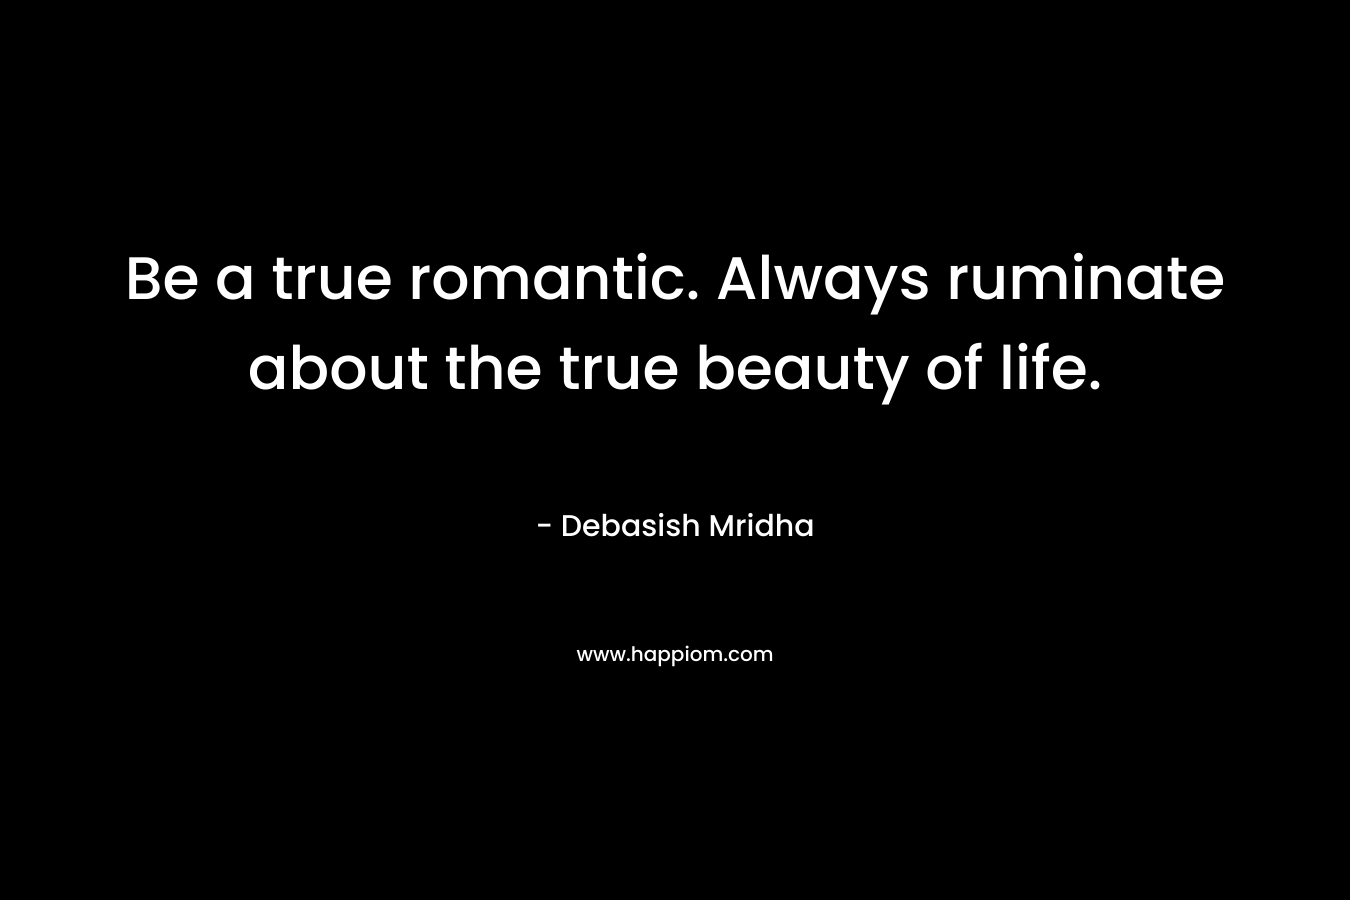 Be a true romantic. Always ruminate about the true beauty of life.